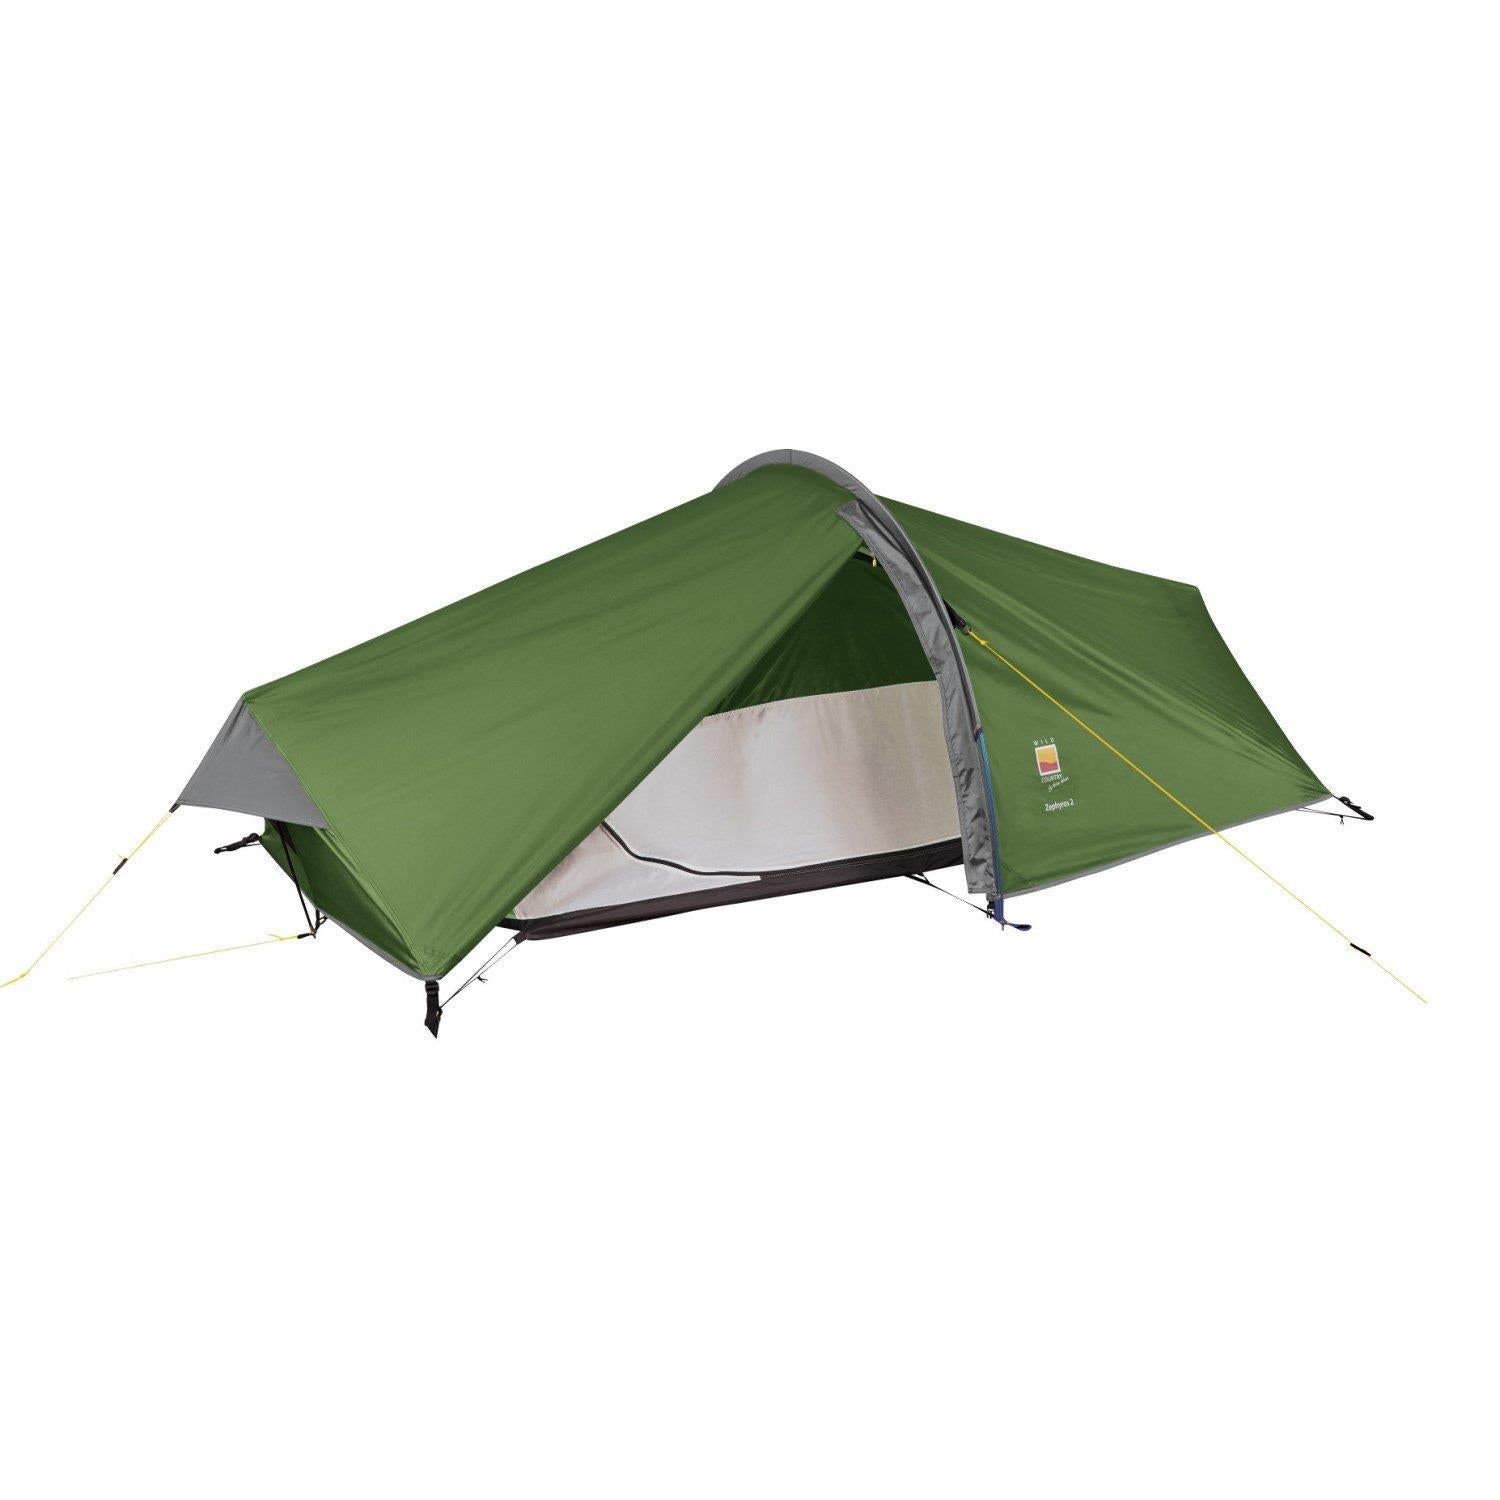 Wild Country Zephyros Compact 2 V3 Tent + Footprint Package - Main